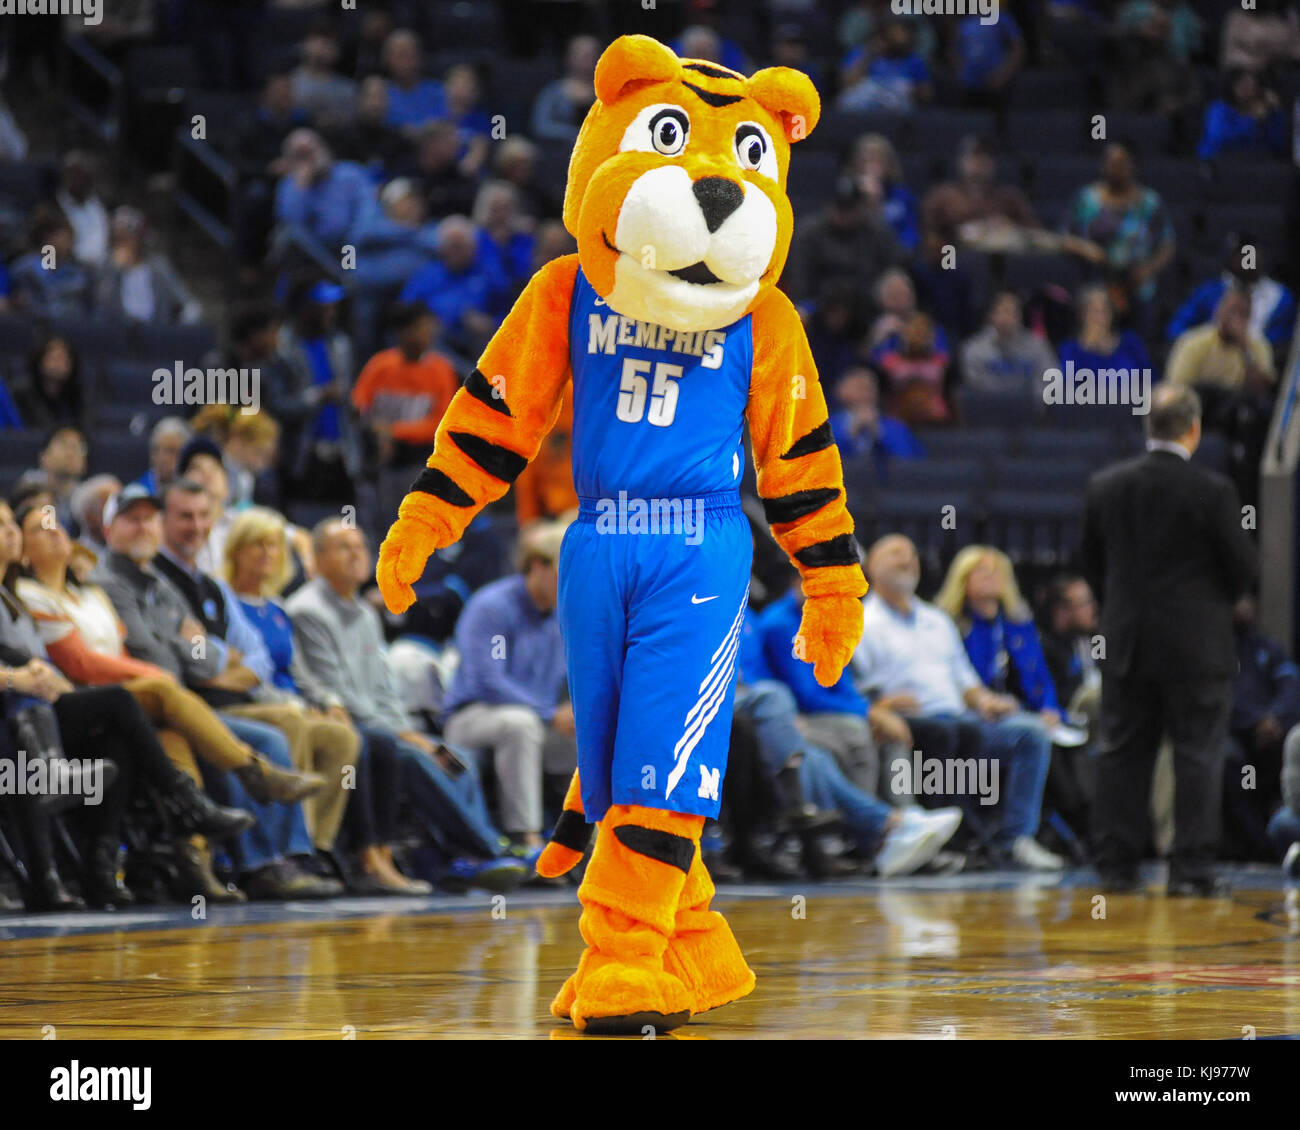 November 20, 2017; Memphis, TN, USA; Memphis Tigers Mascot, POUNCER,  performs during a break in the NCAA D1 basketball game against New Orleans.  The Memphis Tigers defeated the New Orleans Privateers, 63-52.